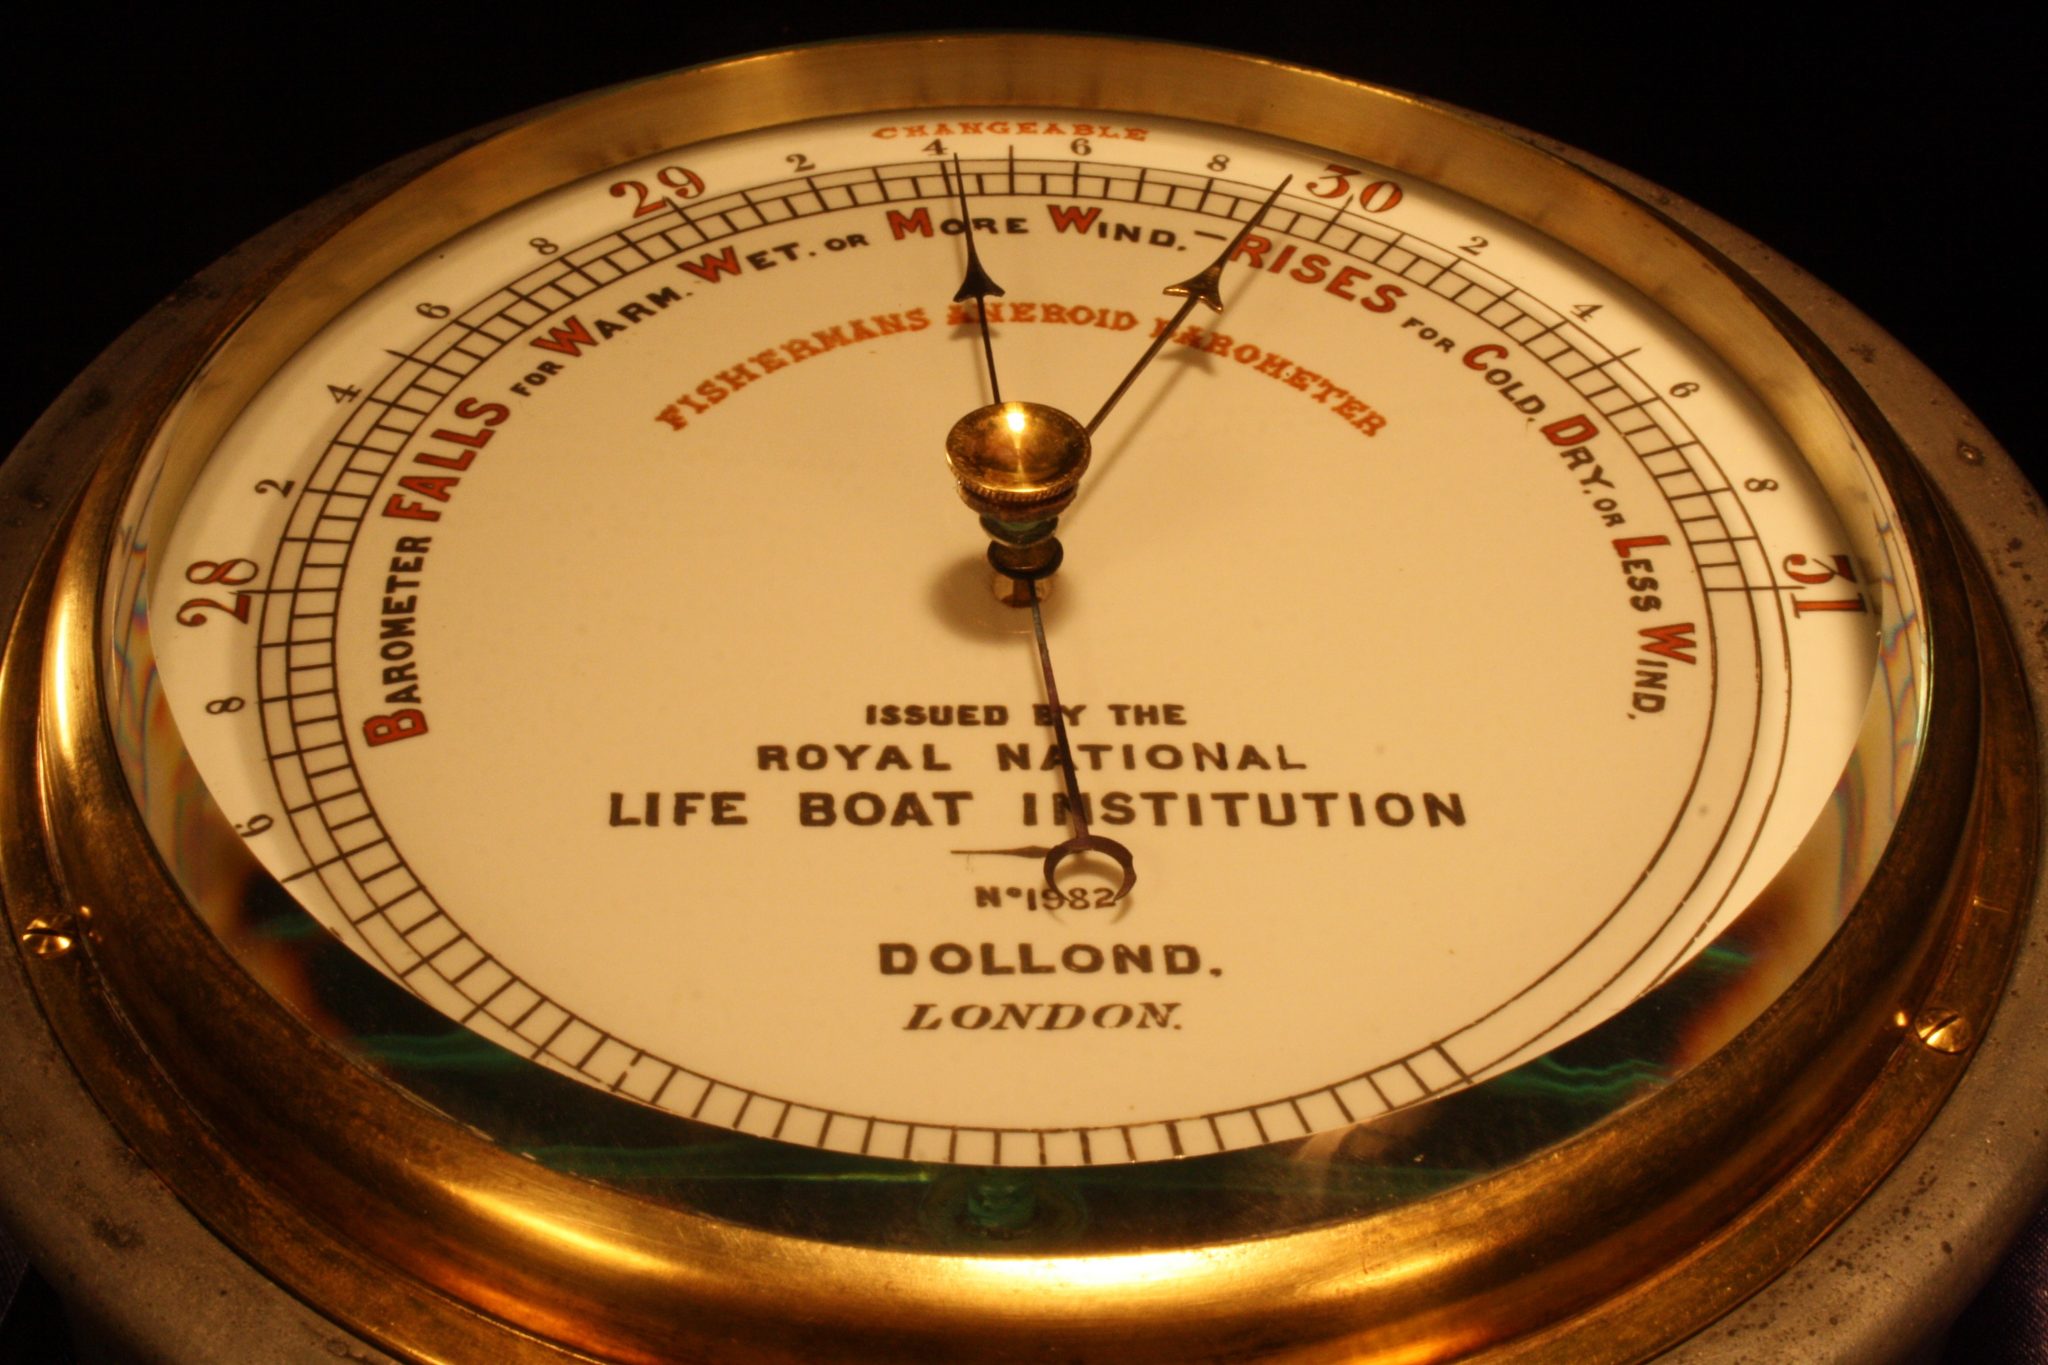 FISHERMANS MARINE BAROMETER BY DOLLOND No 1982 c1885 – Sold